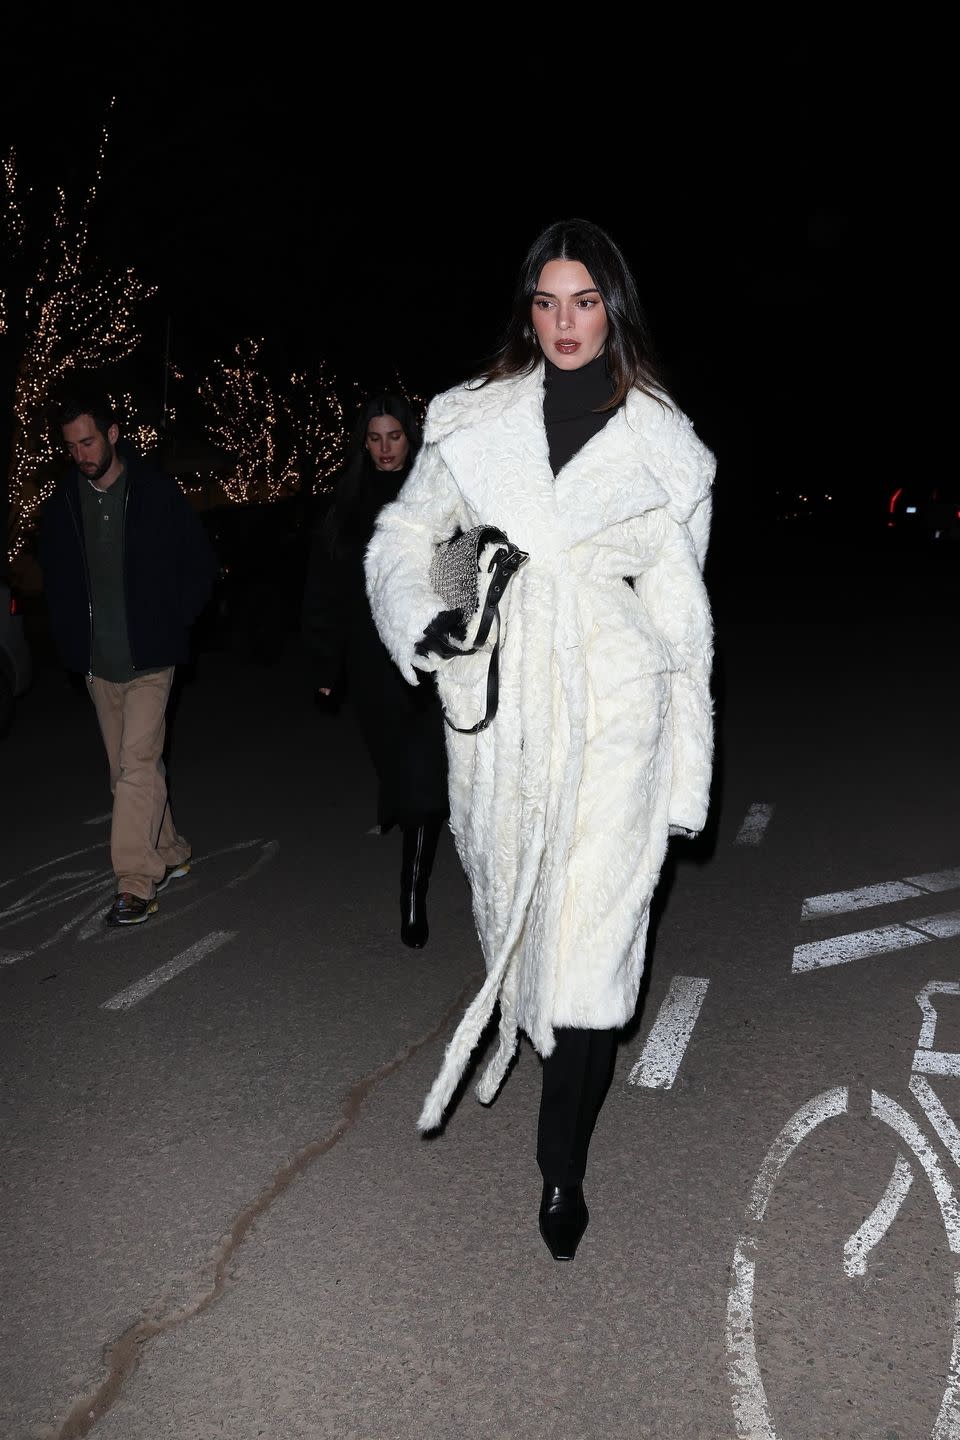 kendall in a white coat walking down a street with people in the background